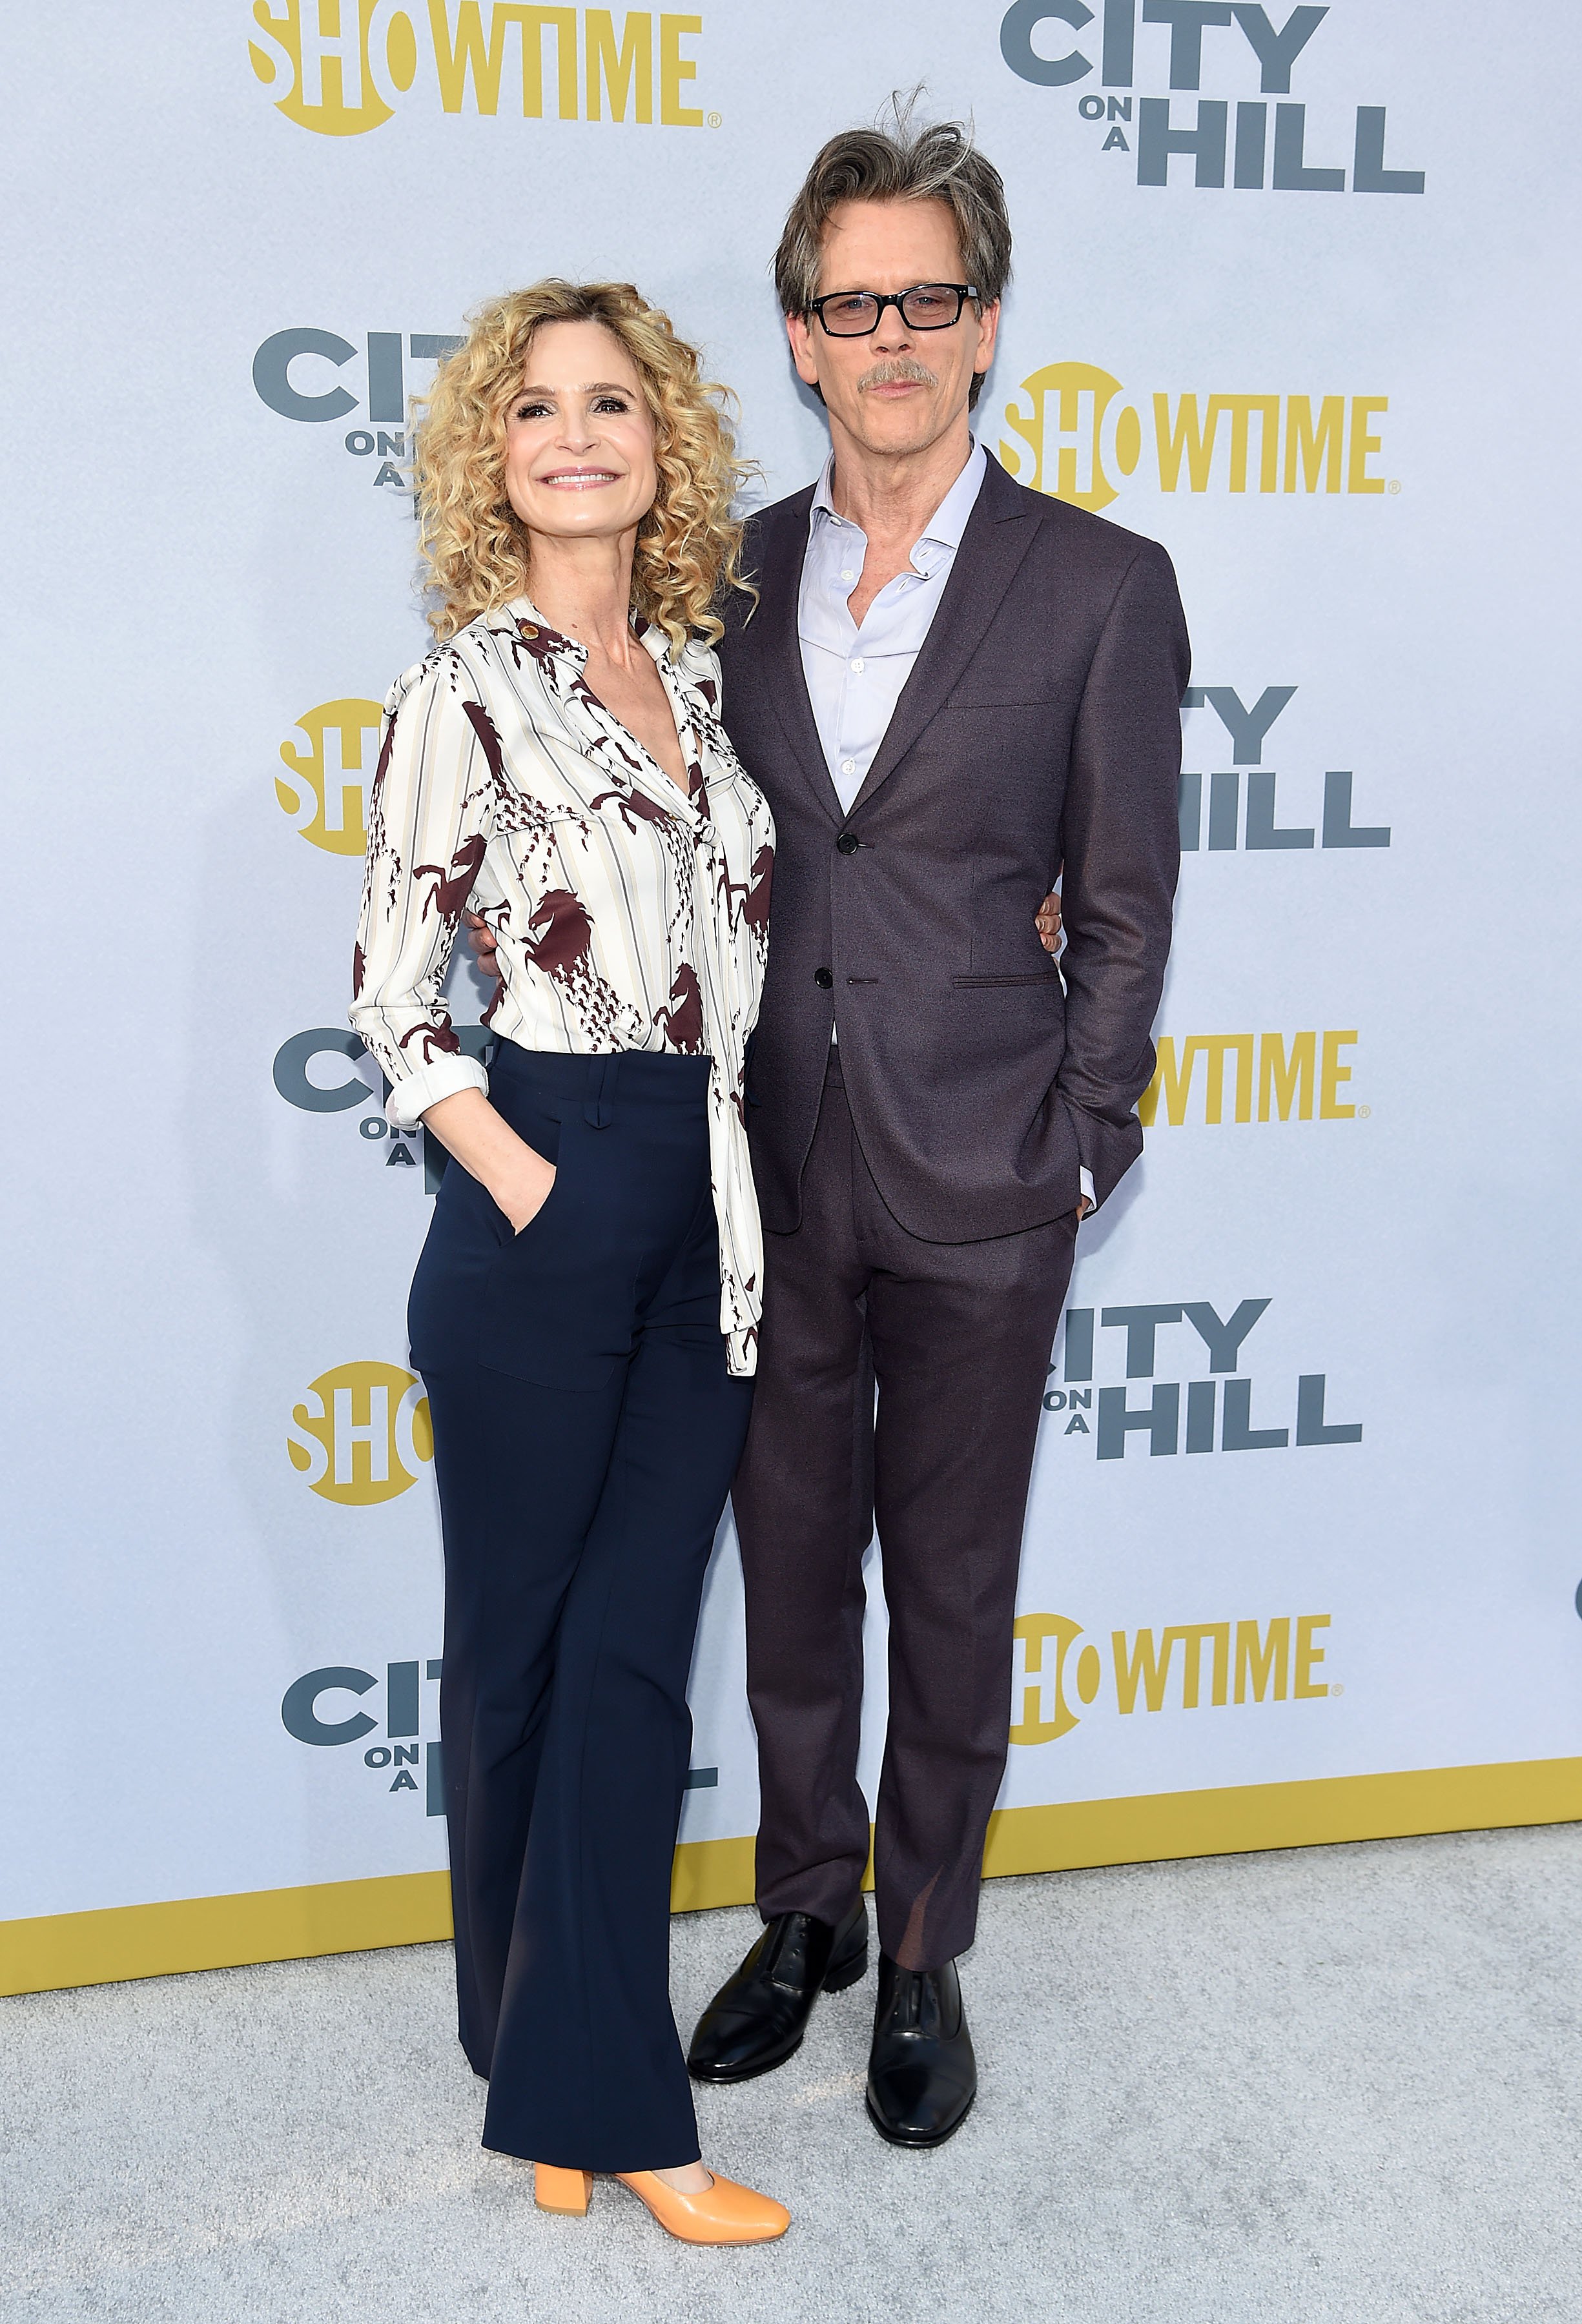 Kyra Sedgwick and Kevin Bacon attend Showtime's "City On A Hill" in New York City on June 4, 2019 | Photo: Getty Images